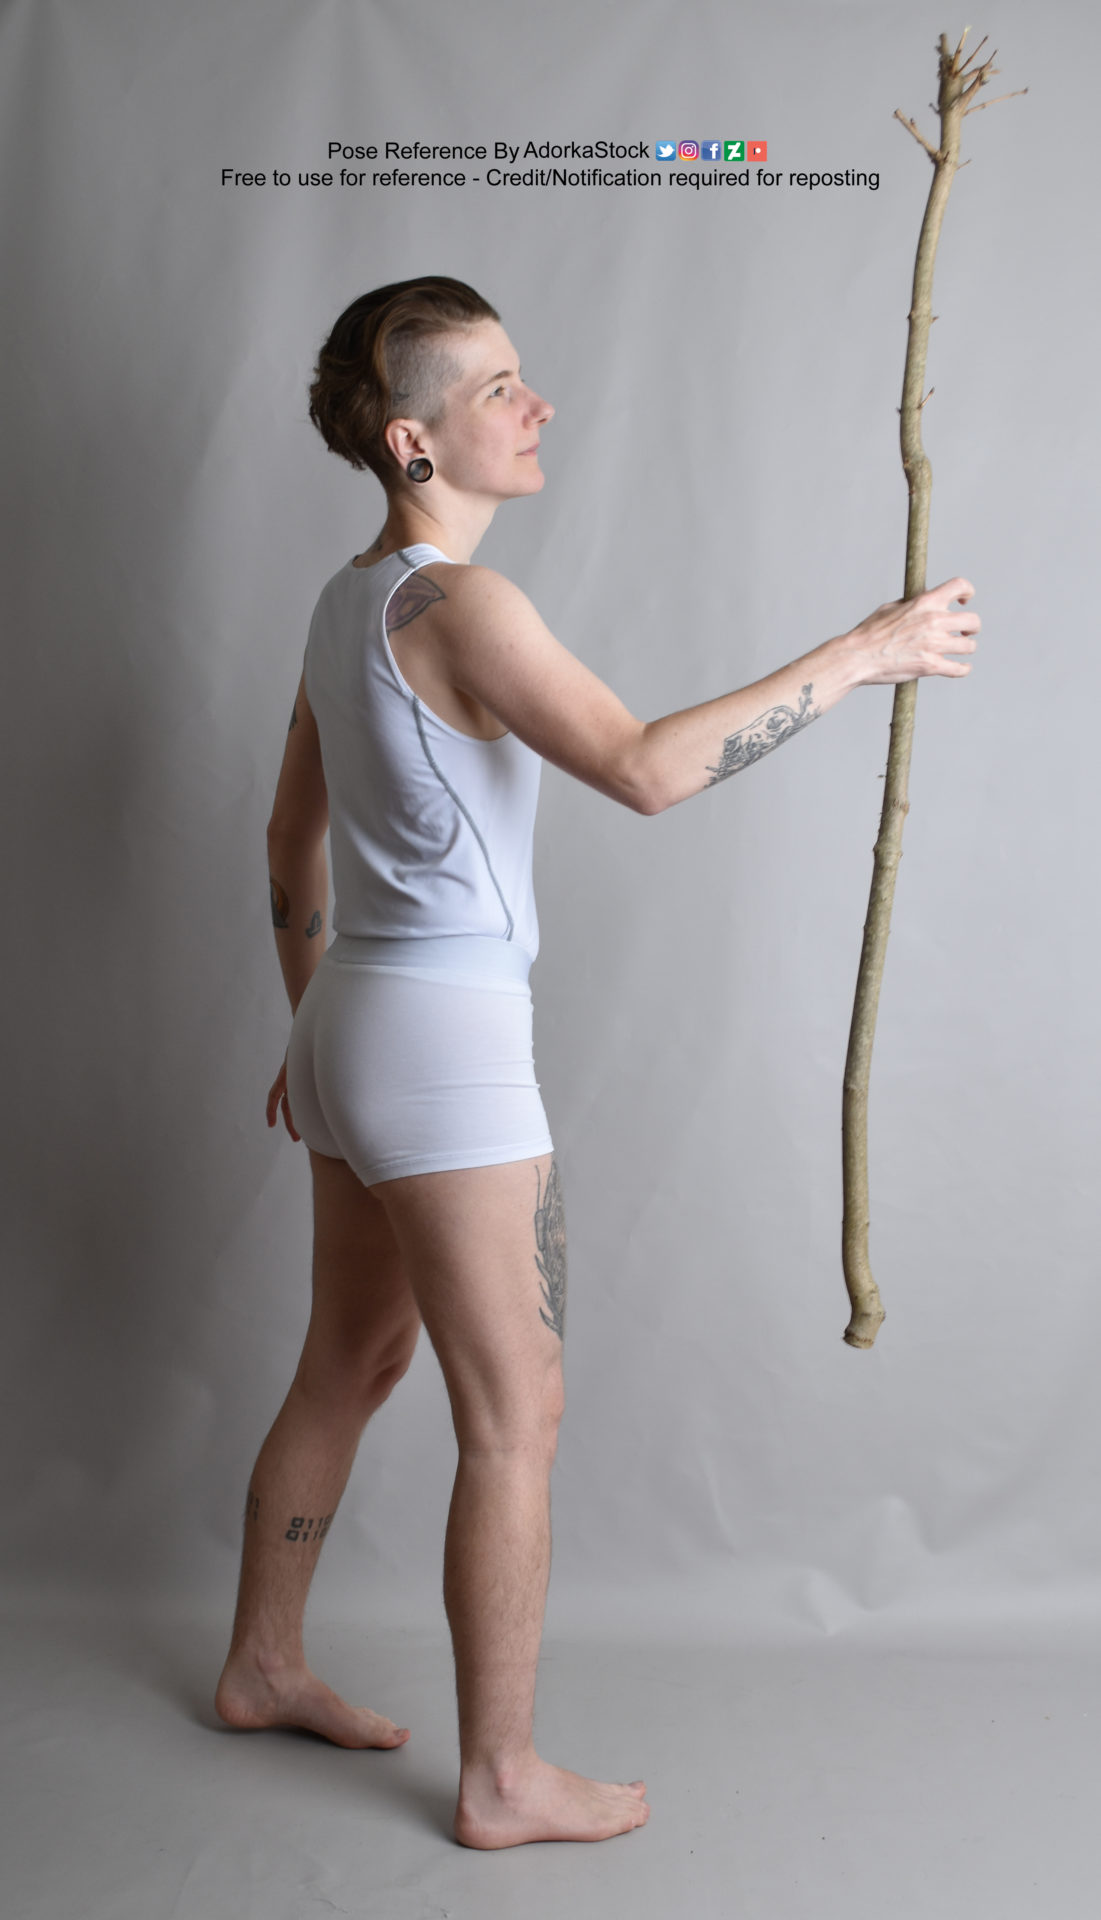 Nonbinary white pose reference model holding a cool stick like a mage or wizard